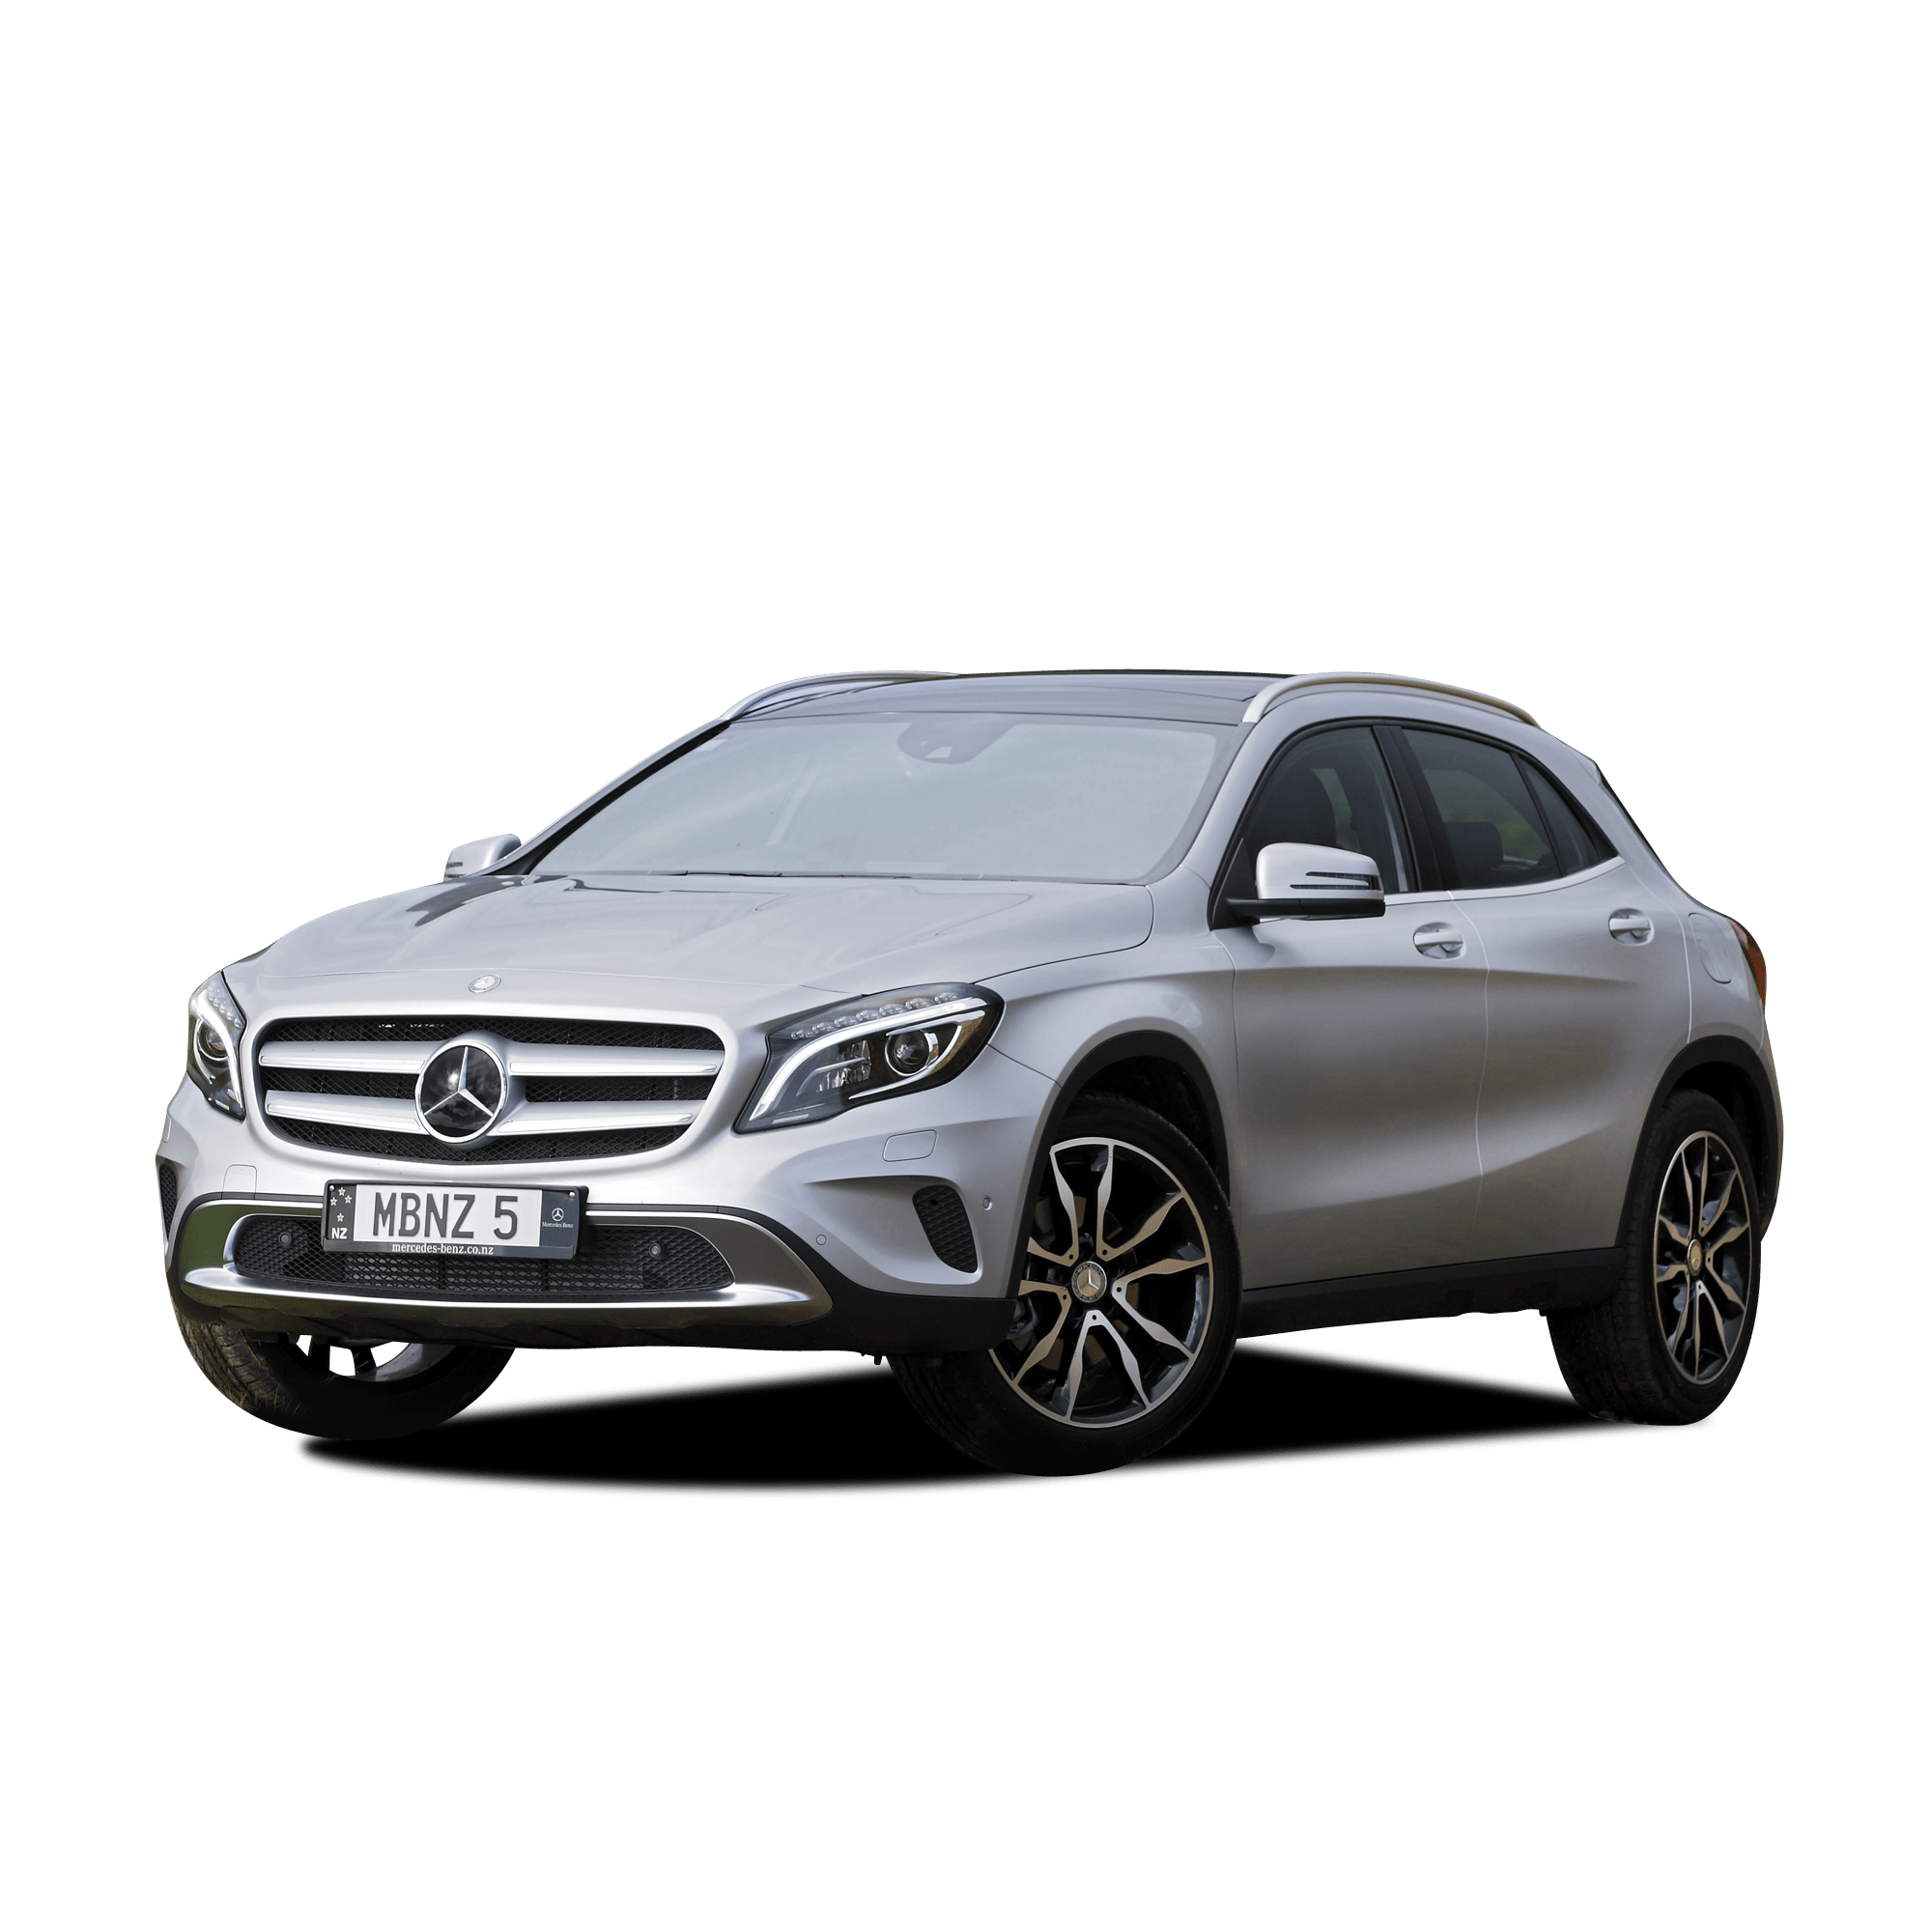 Mercedes GLA 250 2015 review  CarsGuide